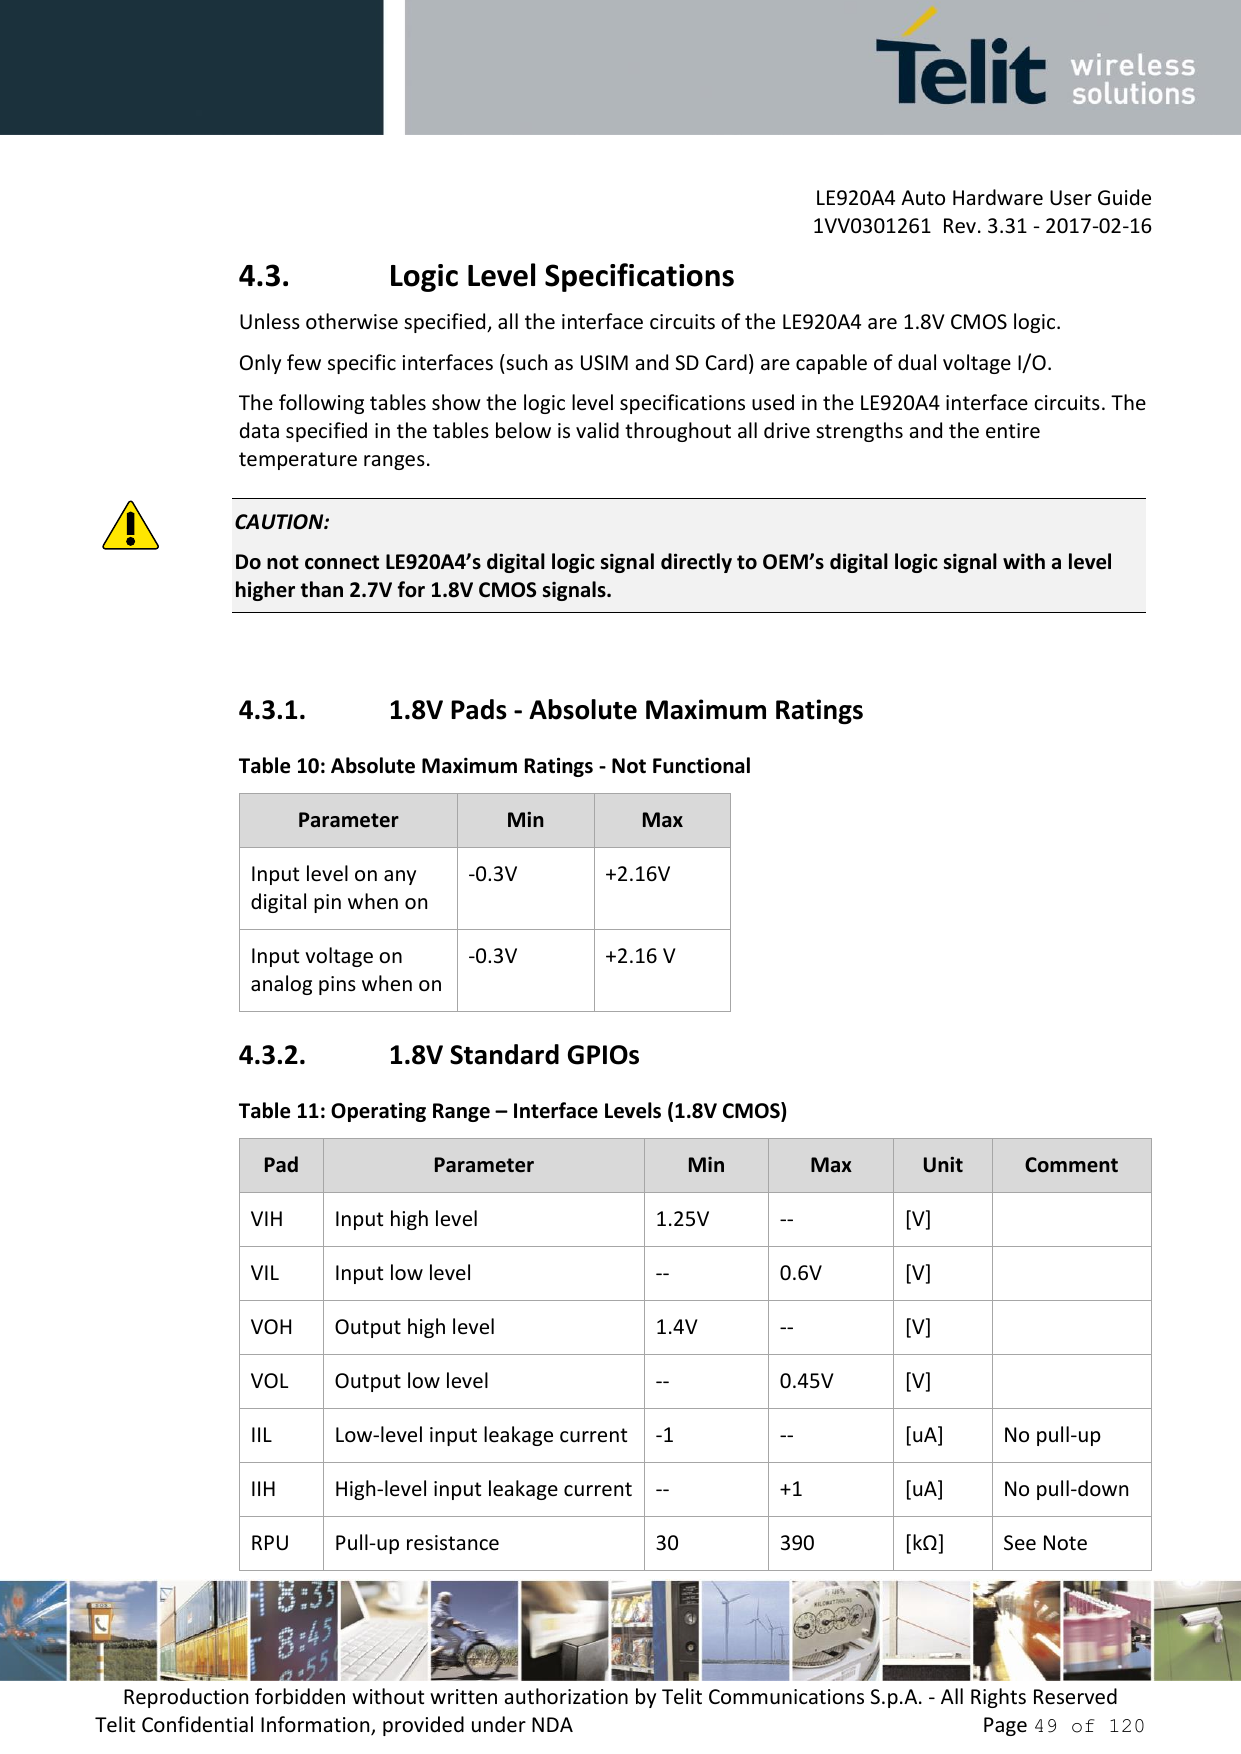         LE920A4 Auto Hardware User Guide     1VV0301261  Rev. 3.31 - 2017-02-16 Reproduction forbidden without written authorization by Telit Communications S.p.A. - All Rights Reserved Telit Confidential Information, provided under NDA                 Page 49 of 120 4.3. Logic Level Specifications Unless otherwise specified, all the interface circuits of the LE920A4 are 1.8V CMOS logic. Only few specific interfaces (such as USIM and SD Card) are capable of dual voltage I/O. The following tables show the logic level specifications used in the LE920A4 interface circuits. The data specified in the tables below is valid throughout all drive strengths and the entire temperature ranges.  CAUTION: Do not connect LE920A4’s digital logic signal directly to OEM’s digital logic signal with a level higher than 2.7V for 1.8V CMOS signals.  4.3.1. 1.8V Pads - Absolute Maximum Ratings Table 10: Absolute Maximum Ratings - Not Functional Parameter Min Max Input level on any digital pin when on -0.3V +2.16V Input voltage on analog pins when on -0.3V +2.16 V 4.3.2. 1.8V Standard GPIOs Table 11: Operating Range – Interface Levels (1.8V CMOS) Pad Parameter Min Max Unit Comment VIH Input high level 1.25V -- [V]  VIL Input low level -- 0.6V [V]  VOH Output high level 1.4V -- [V]  VOL Output low level -- 0.45V [V]  IIL Low-level input leakage current -1 -- [uA] No pull-up IIH High-level input leakage current -- +1 [uA] No pull-down RPU Pull-up resistance 30 390 [kΩ] See Note 